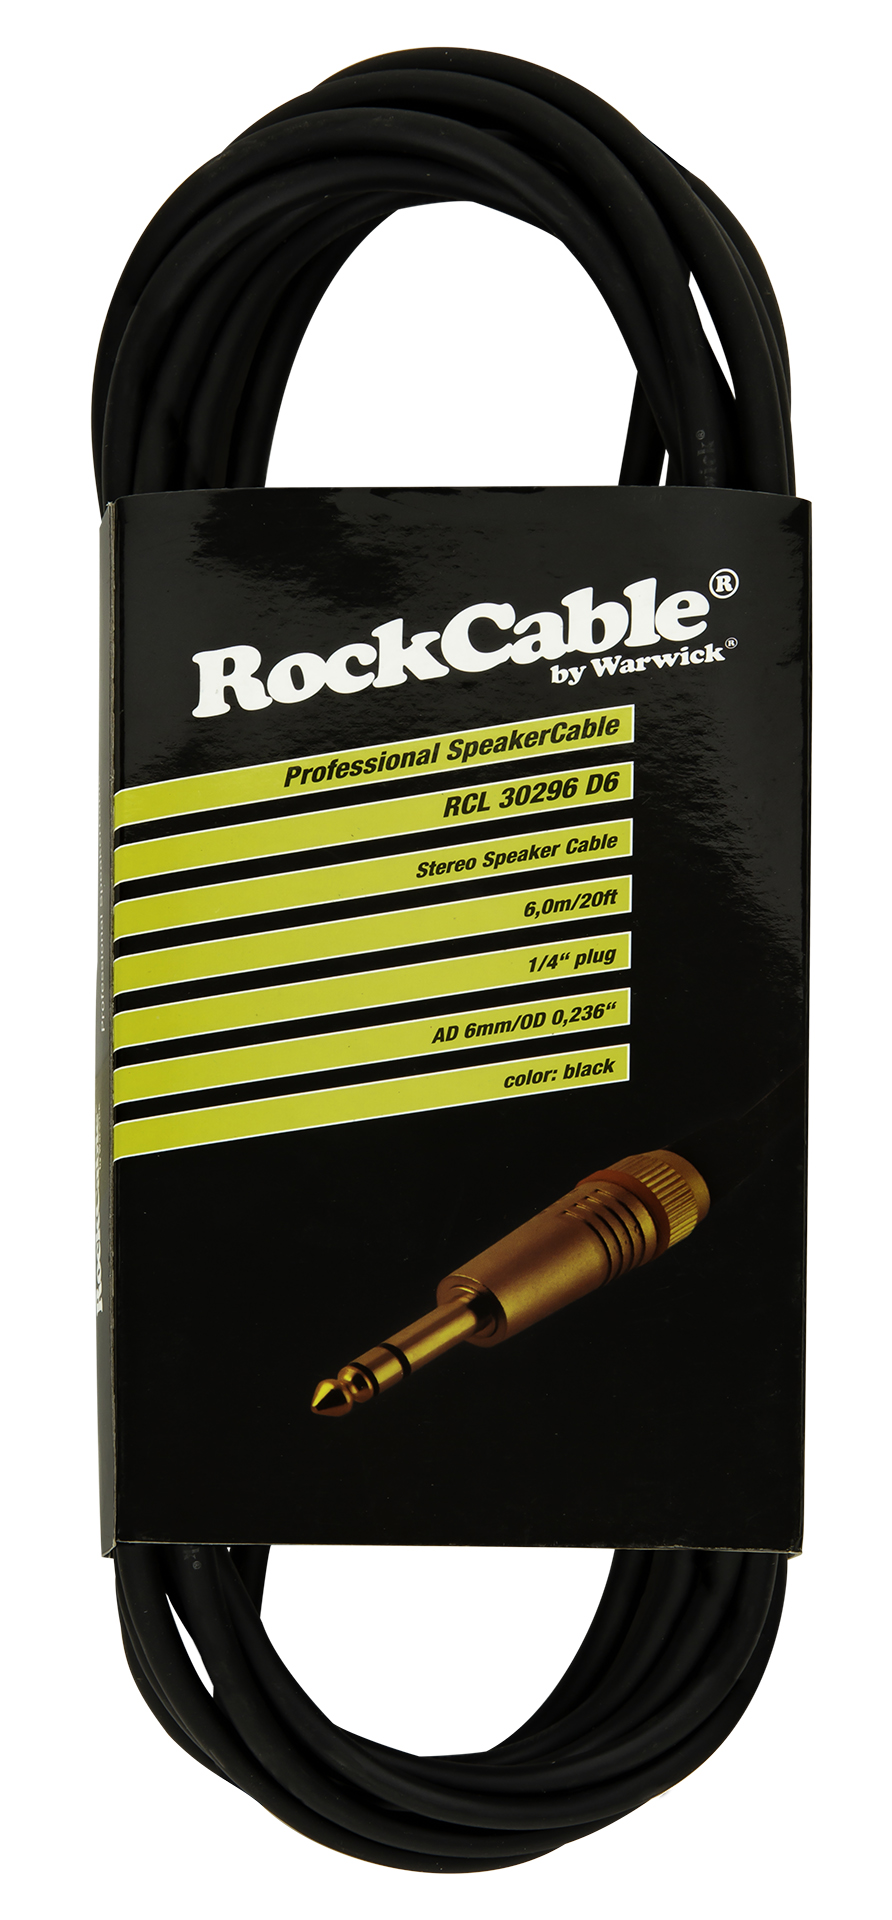 RockCable Speaker Cable - straight TRS (6.3 mm / 1/4"), 6 m / 19.7 ft